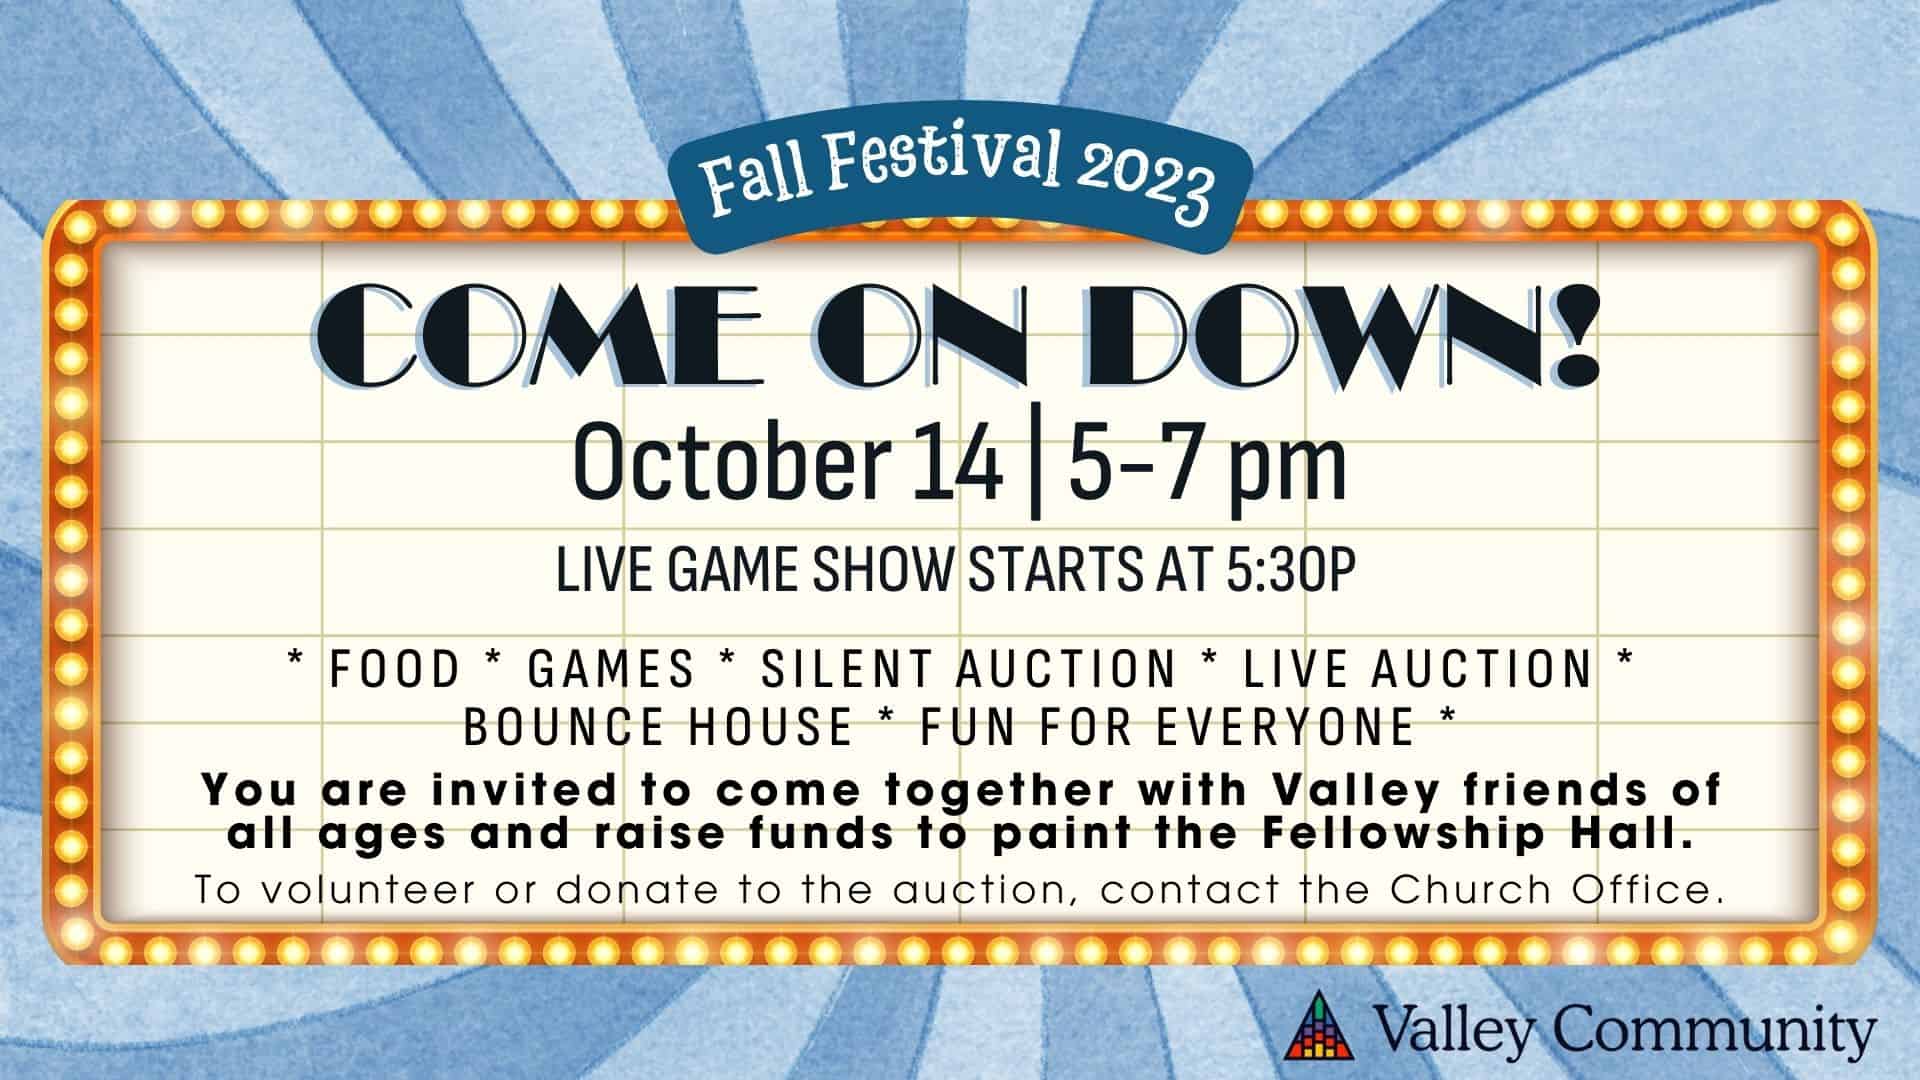 Fall Festival – Come On Down!